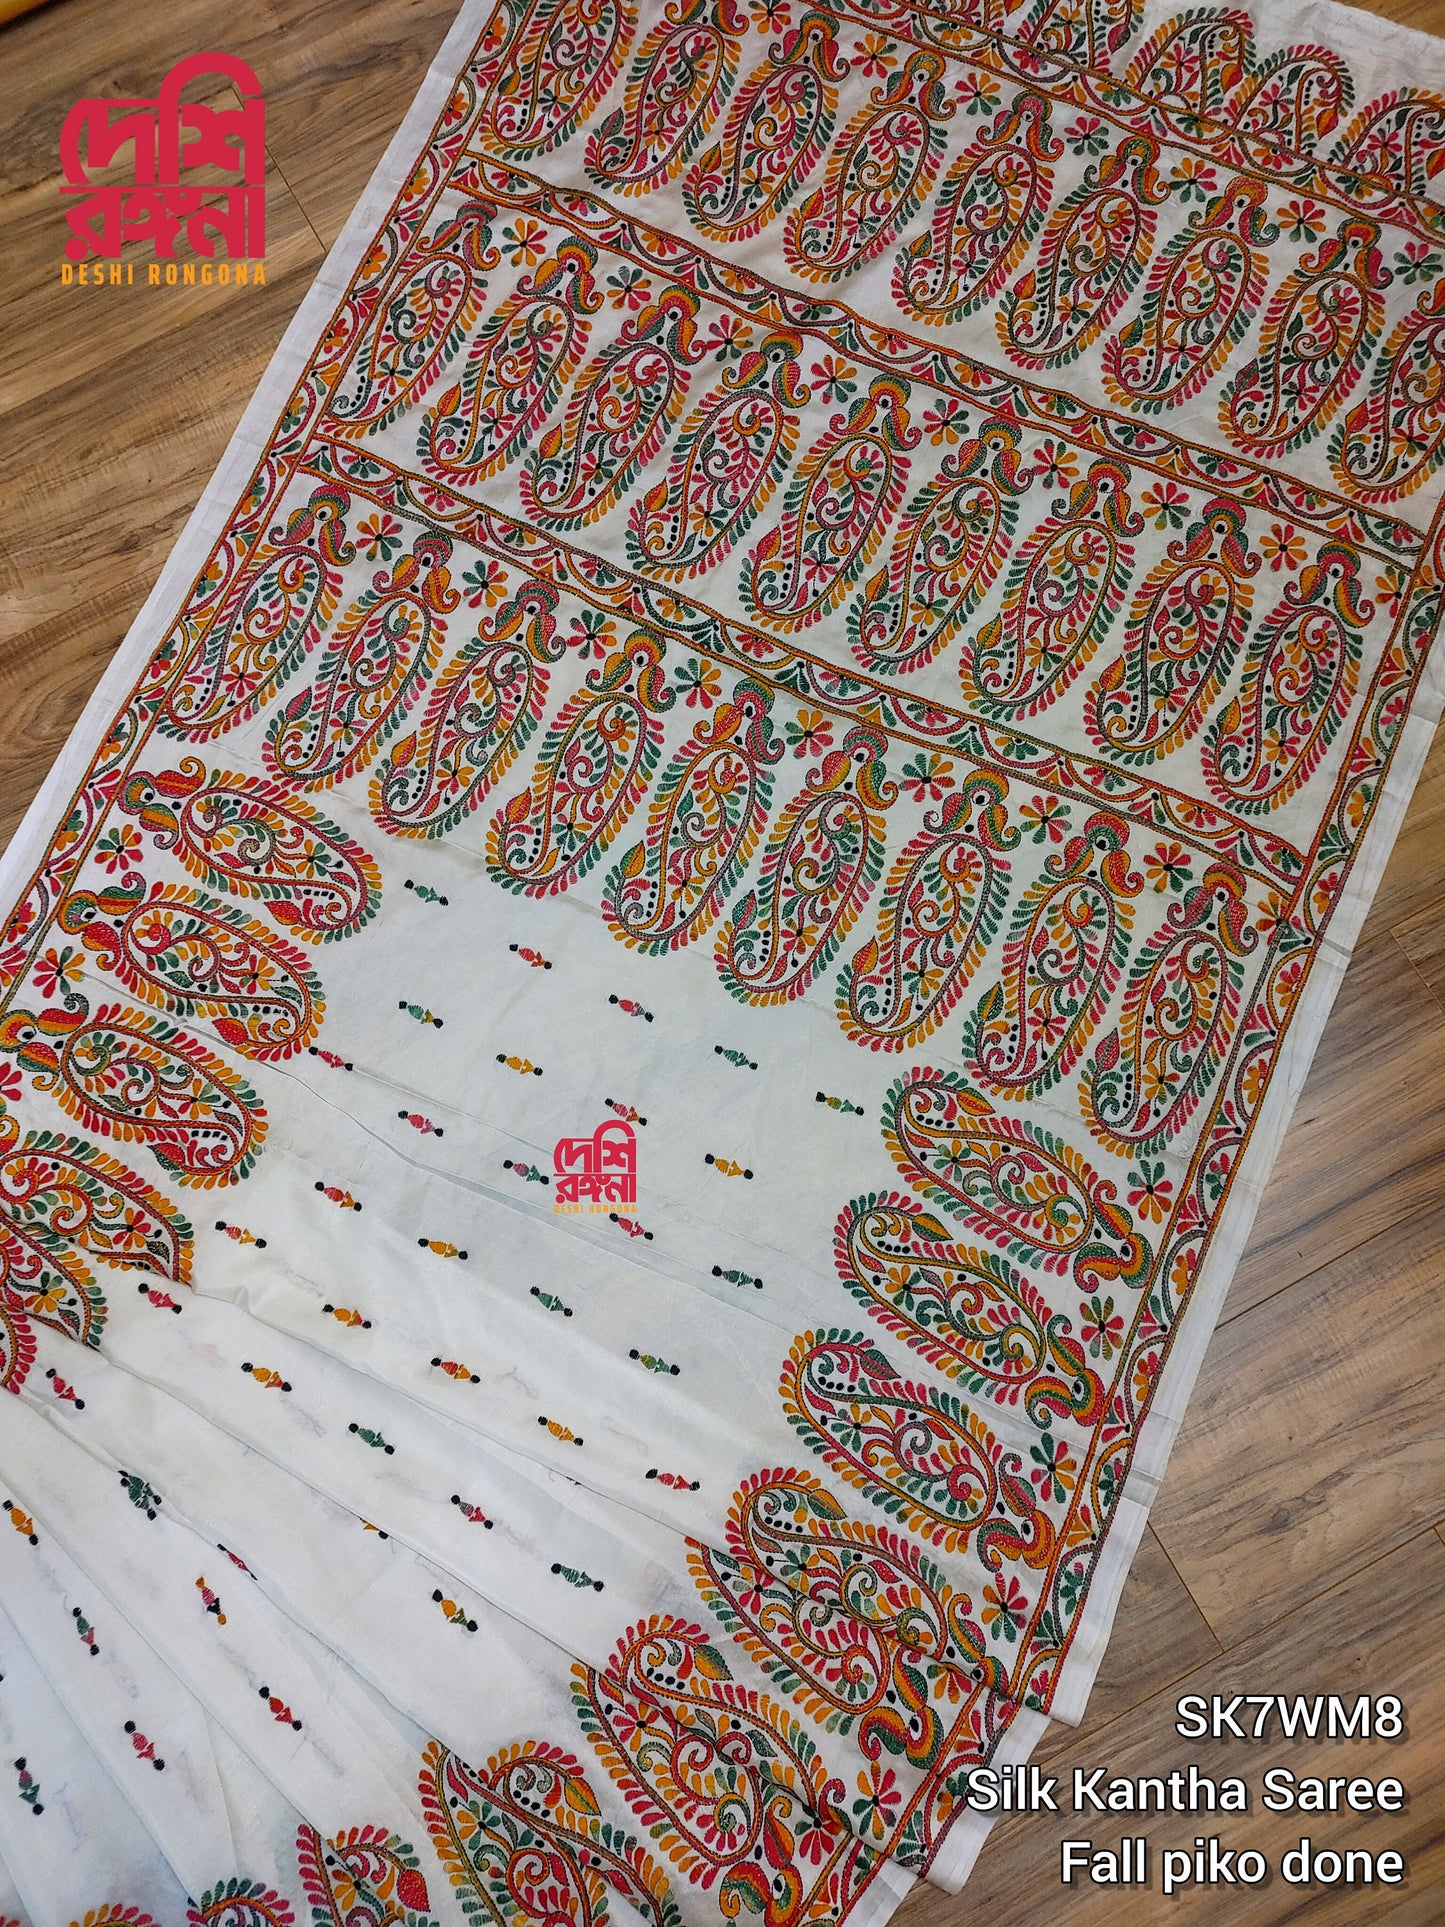 Extraordinary Hand Stiched Kantha Saree, Off White Pure Bangalore Silk, Red/Orange Green Works allover, Fall/piko done, Elegant and Classy